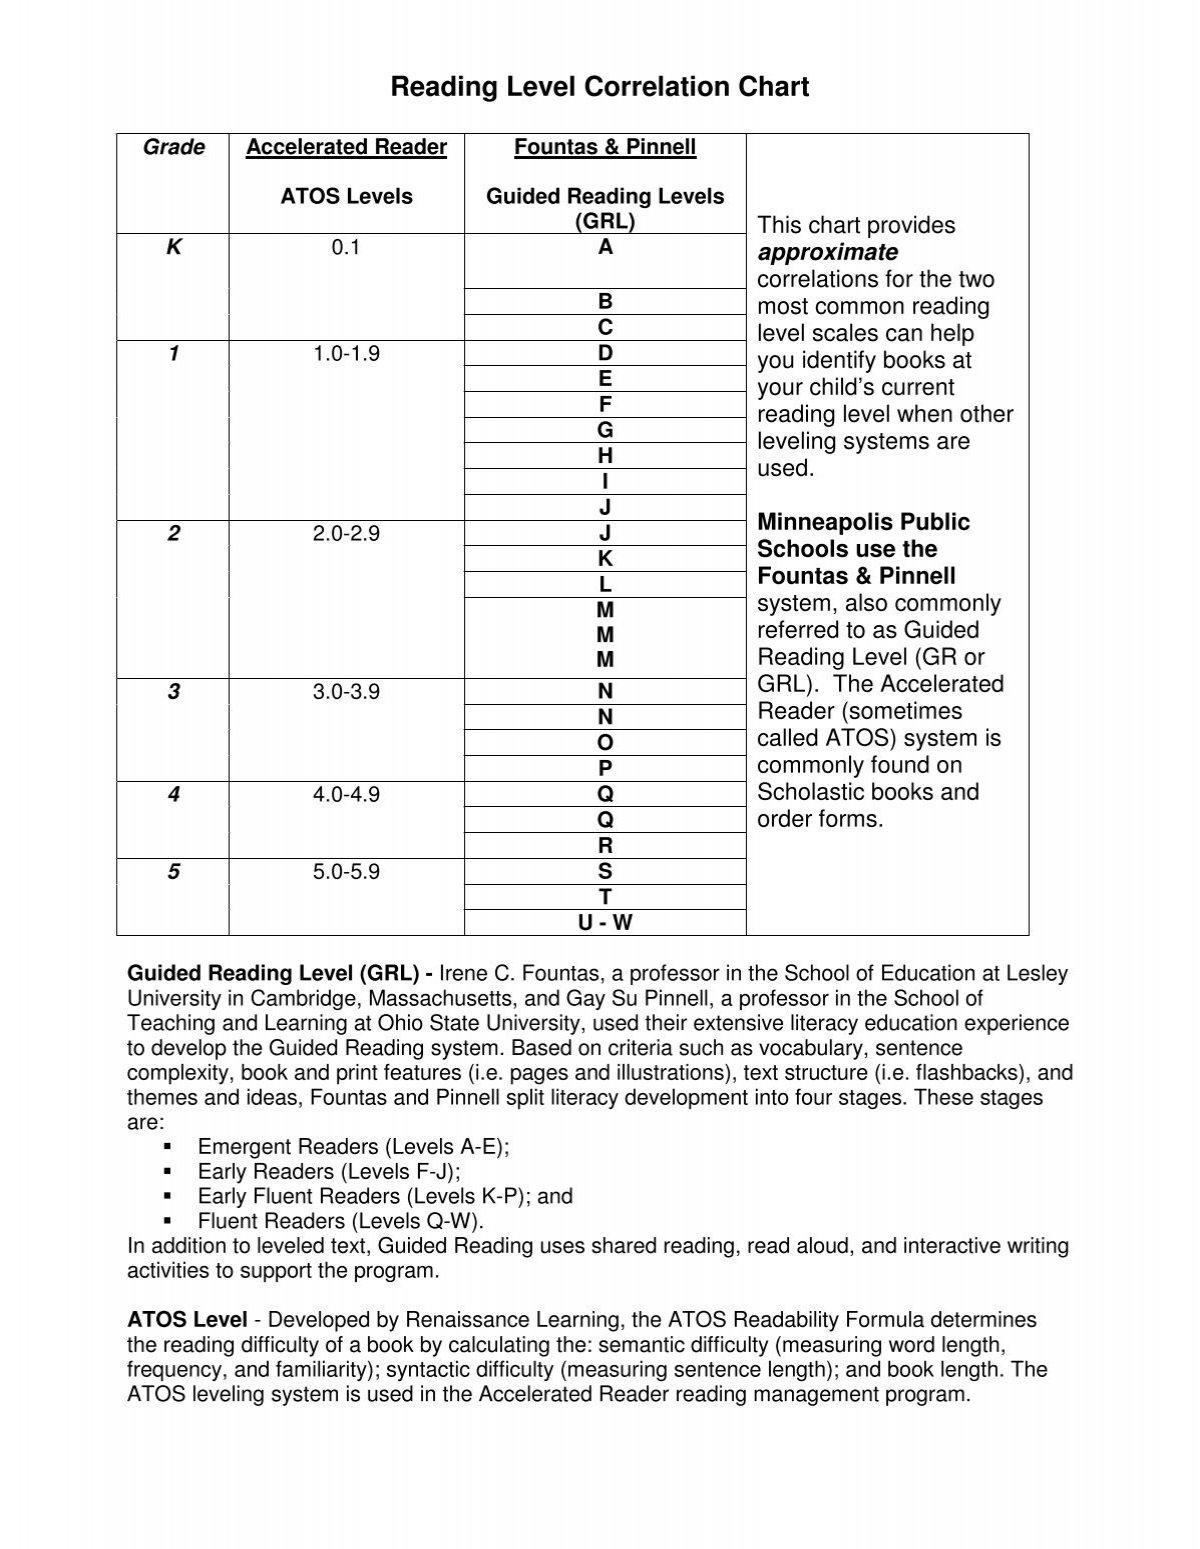 Guided Reading Lexile Correlation Chart